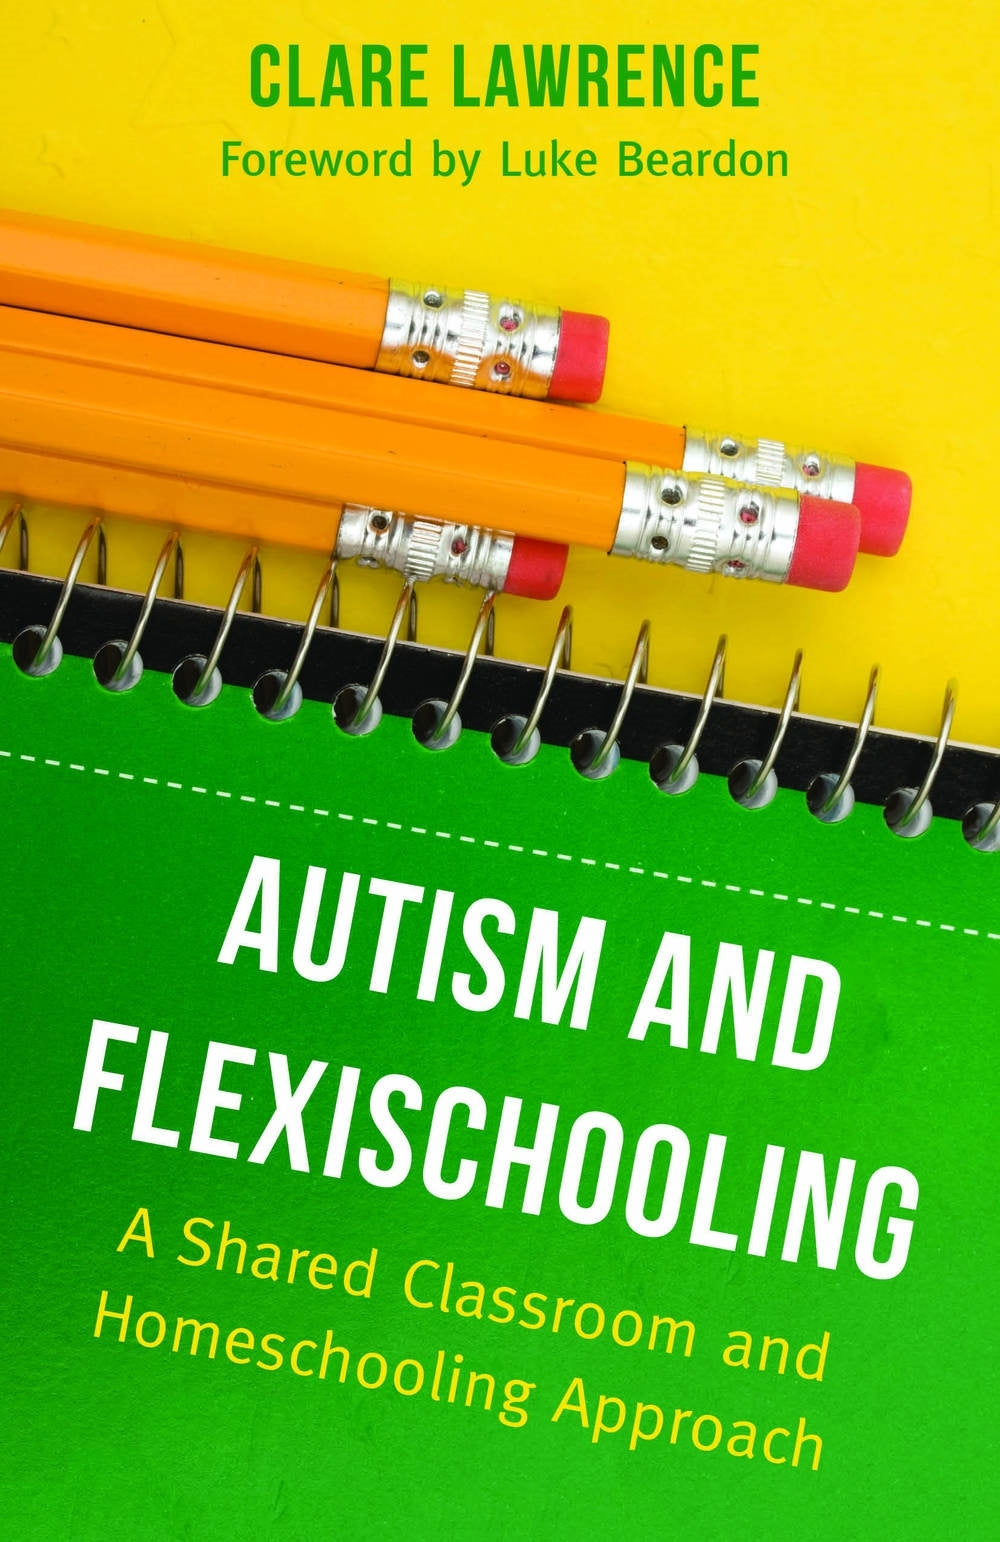 Autism and Flexischooling by Luke Beardon, Clare Lawrence